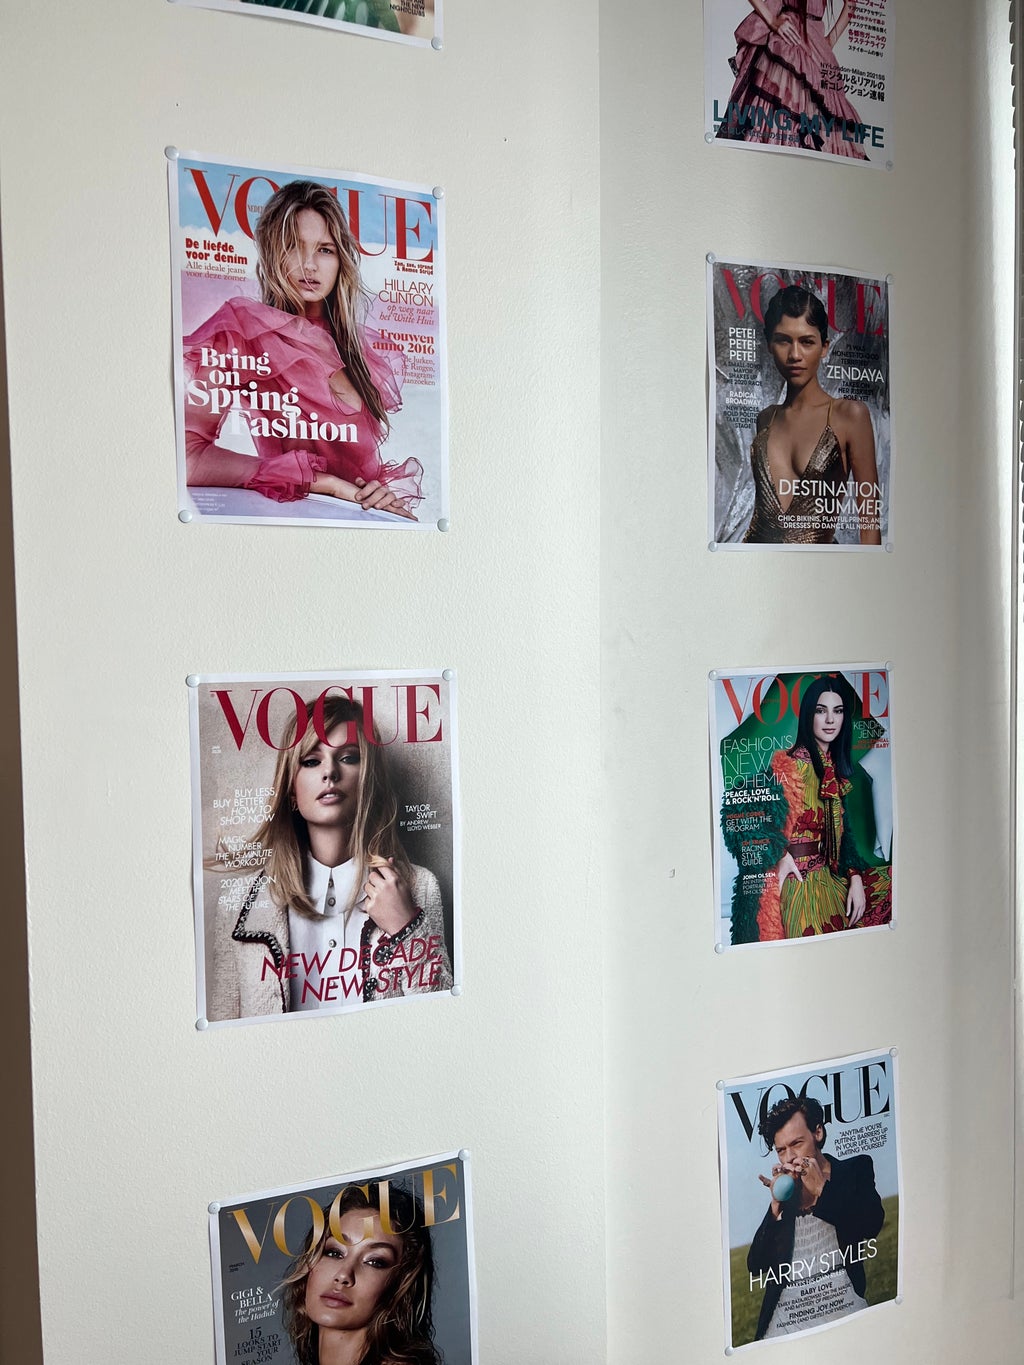 Vogue Magazine covers (photo reference for what is mentioned in article)